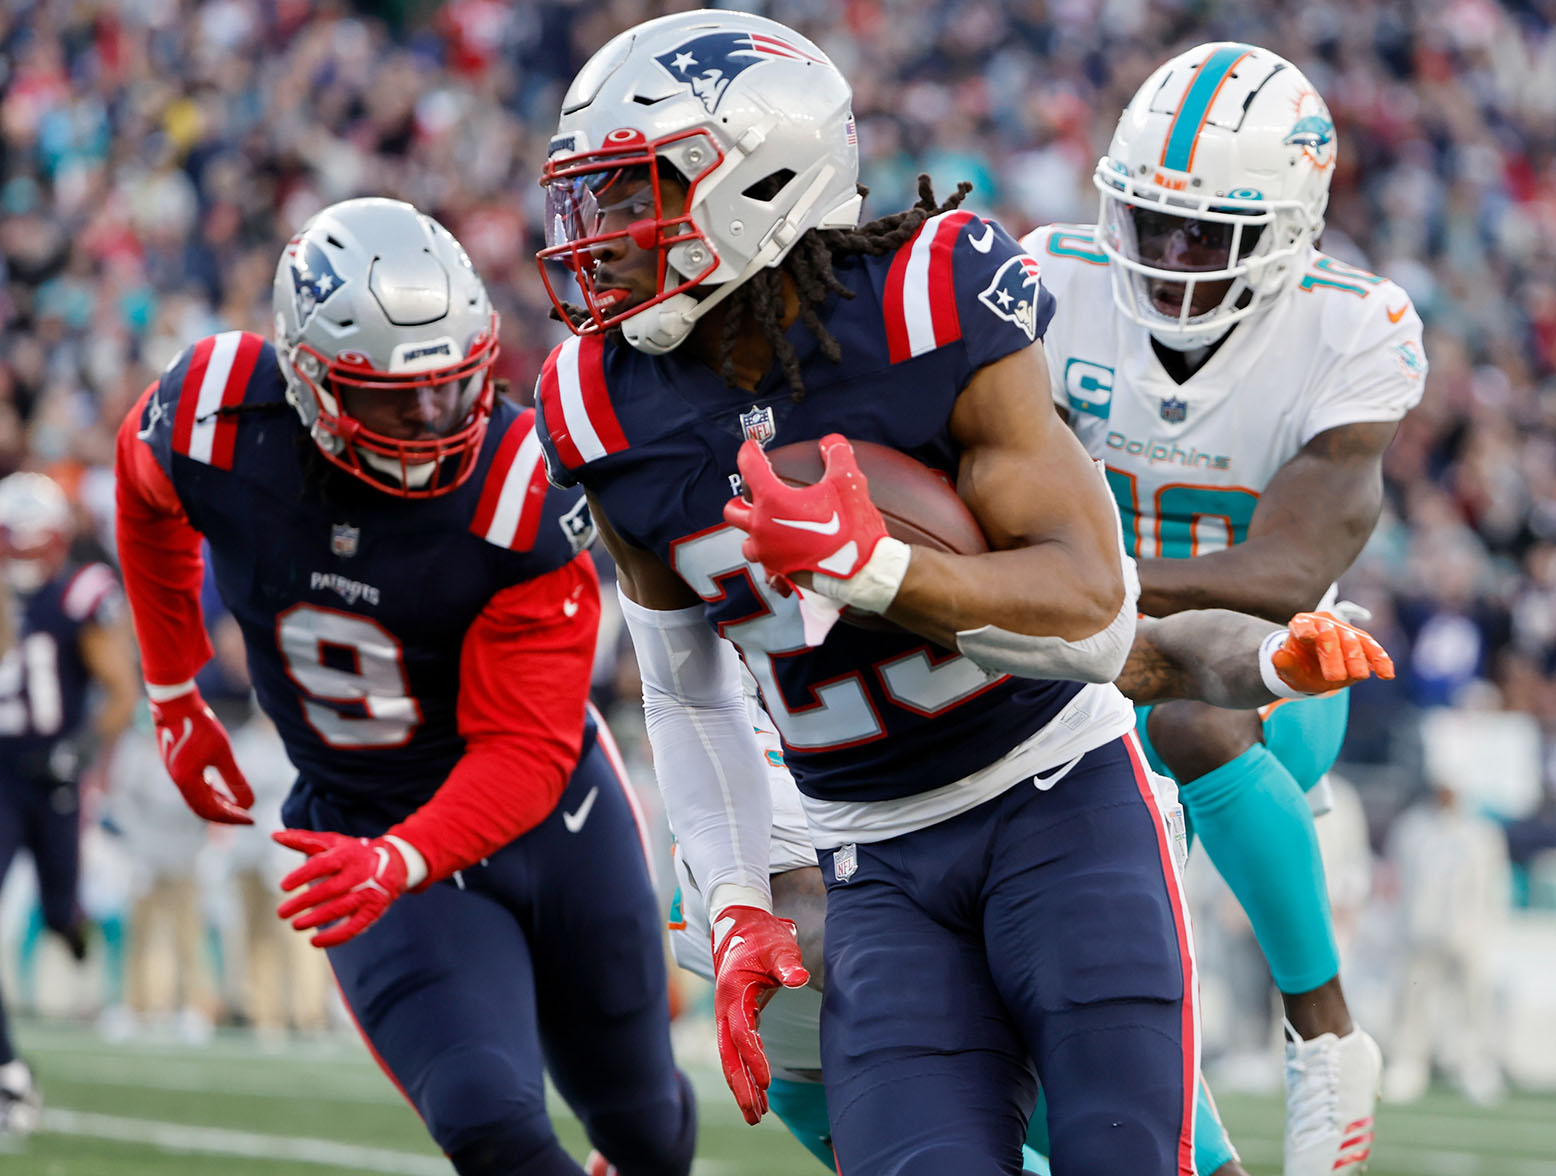 FOXBOROUGH, MASSACHUSETTS - JANUARY 01: Kyle Dugger #23 of the New England Patriots runs back an interception for a touchdown against the Miami Dolphins during the third quarter at Gillette Stadium on January 01, 2023 in Foxborough, Massachusetts. (Photo by Winslow Townson/Getty Images)